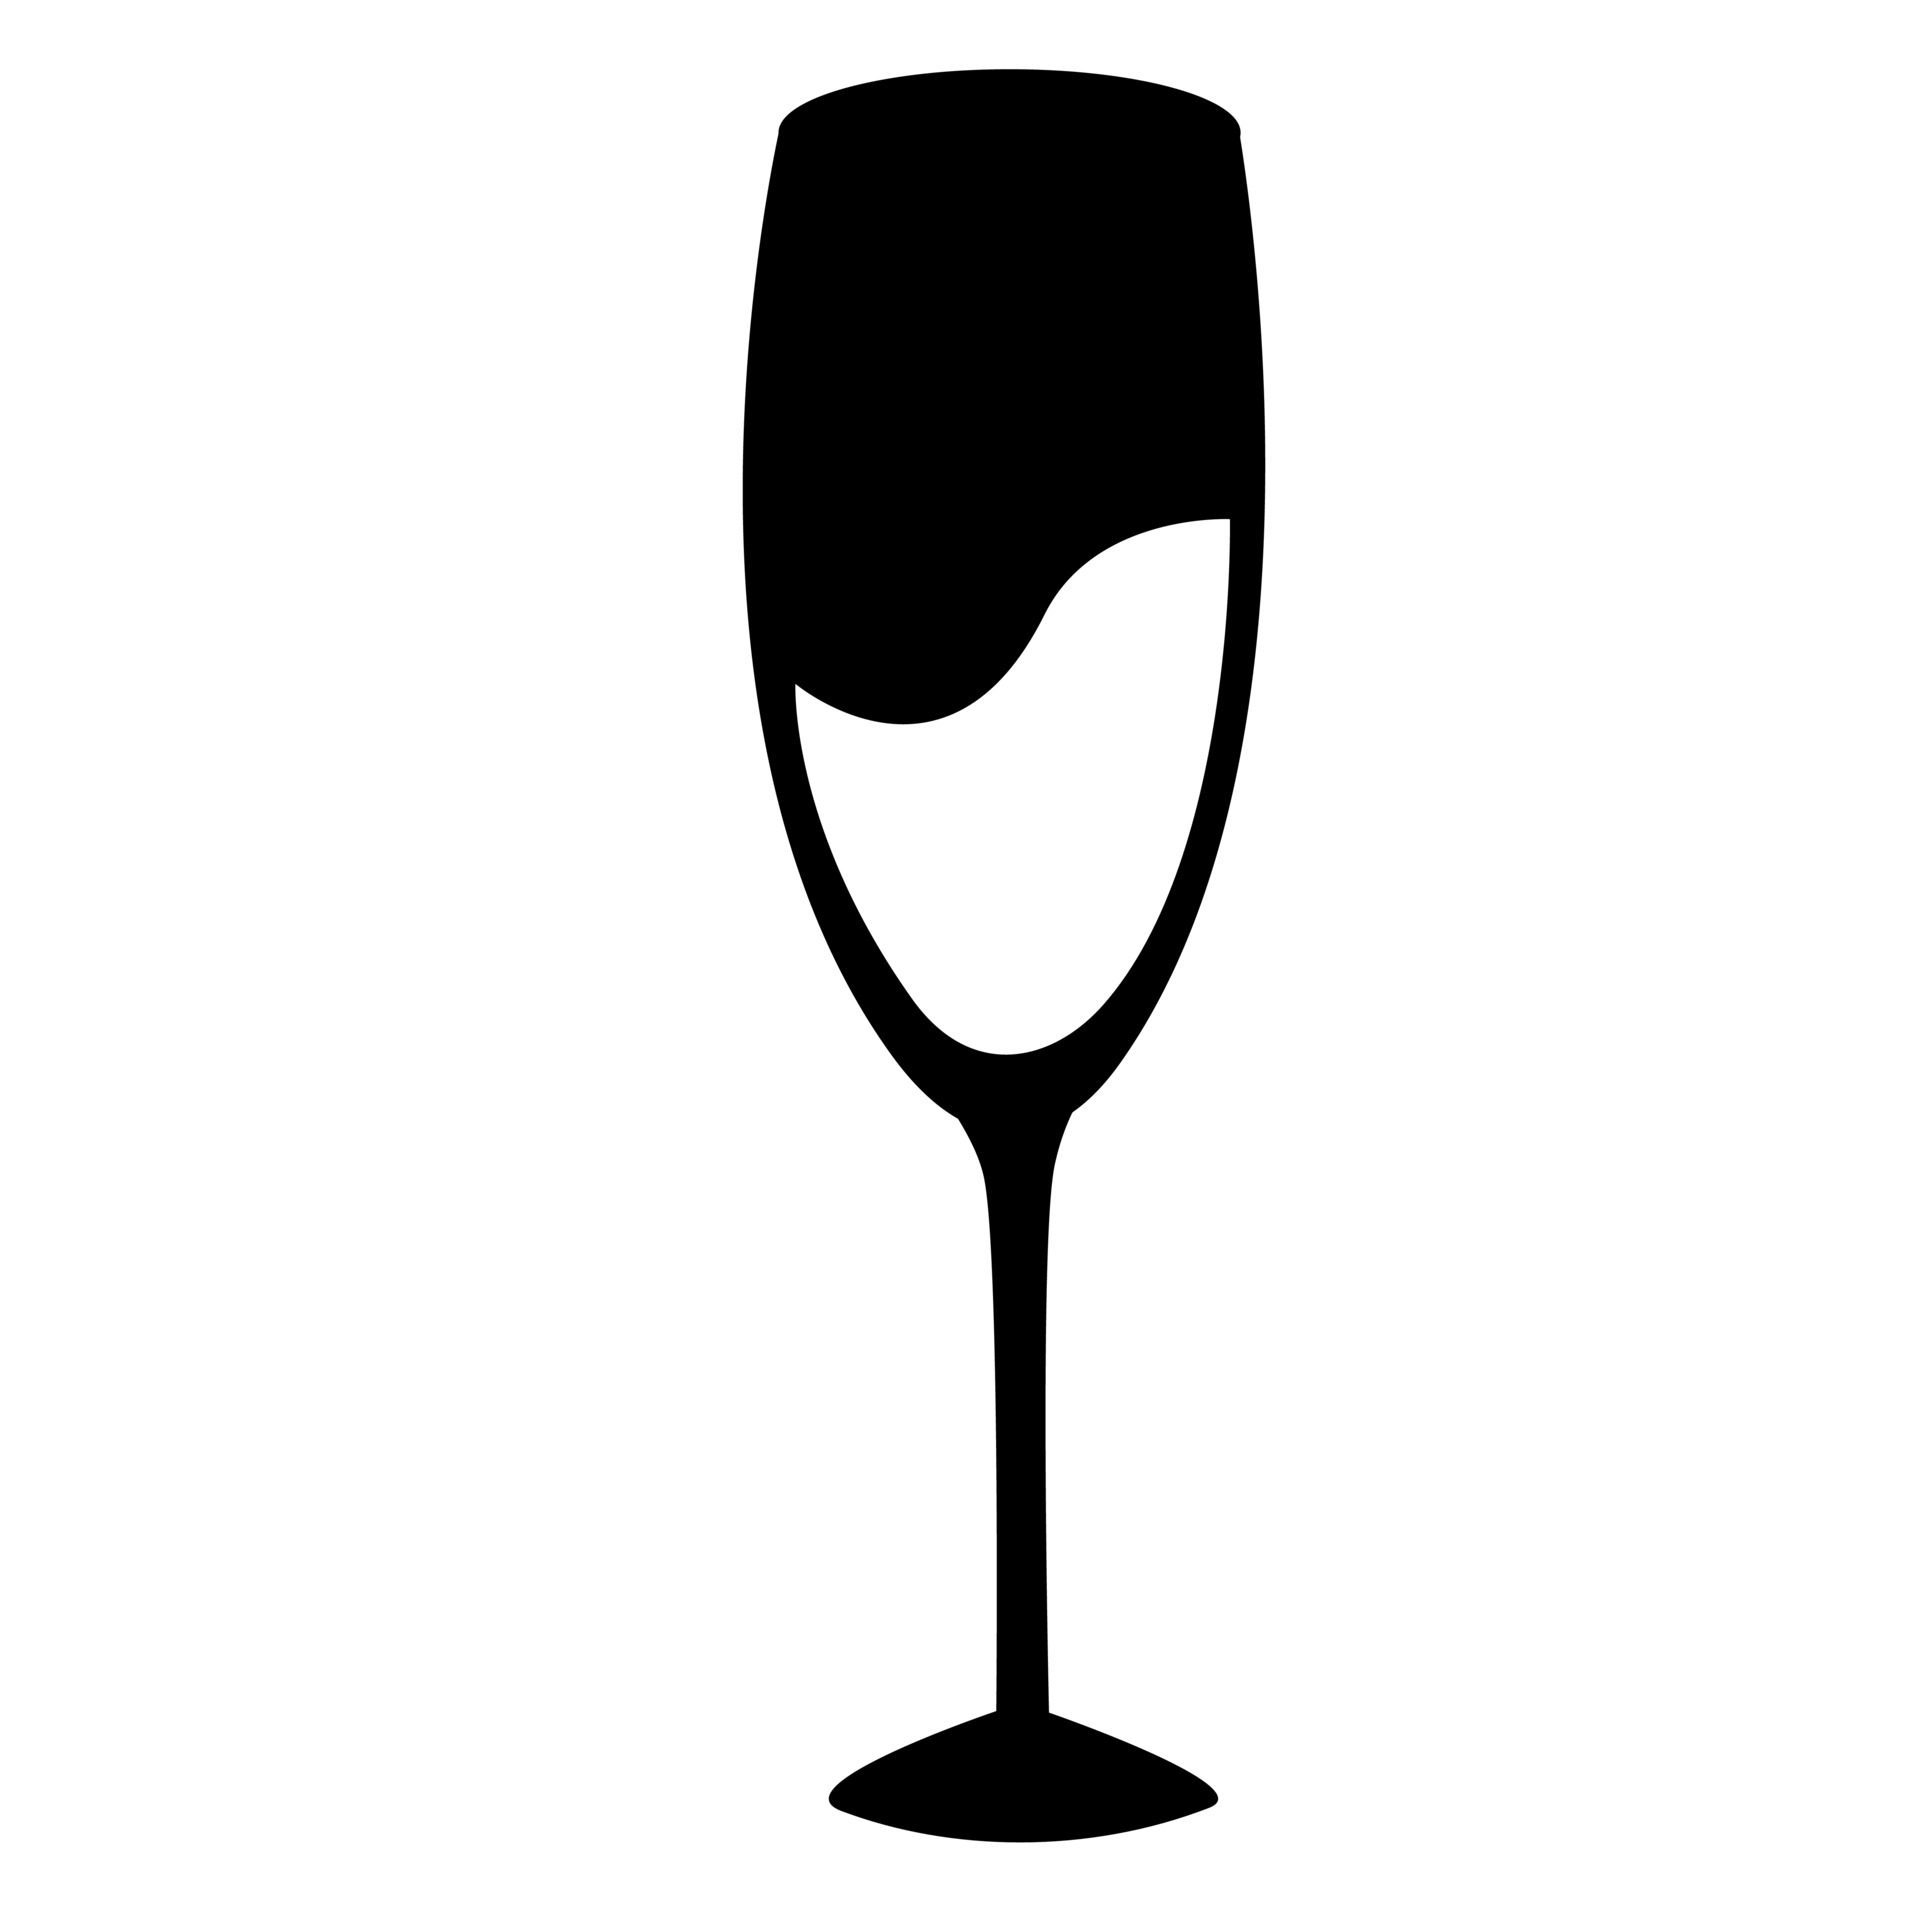 https://static.vecteezy.com/system/resources/previews/006/643/170/original/champagne-glass-icon-free-vector.jpg